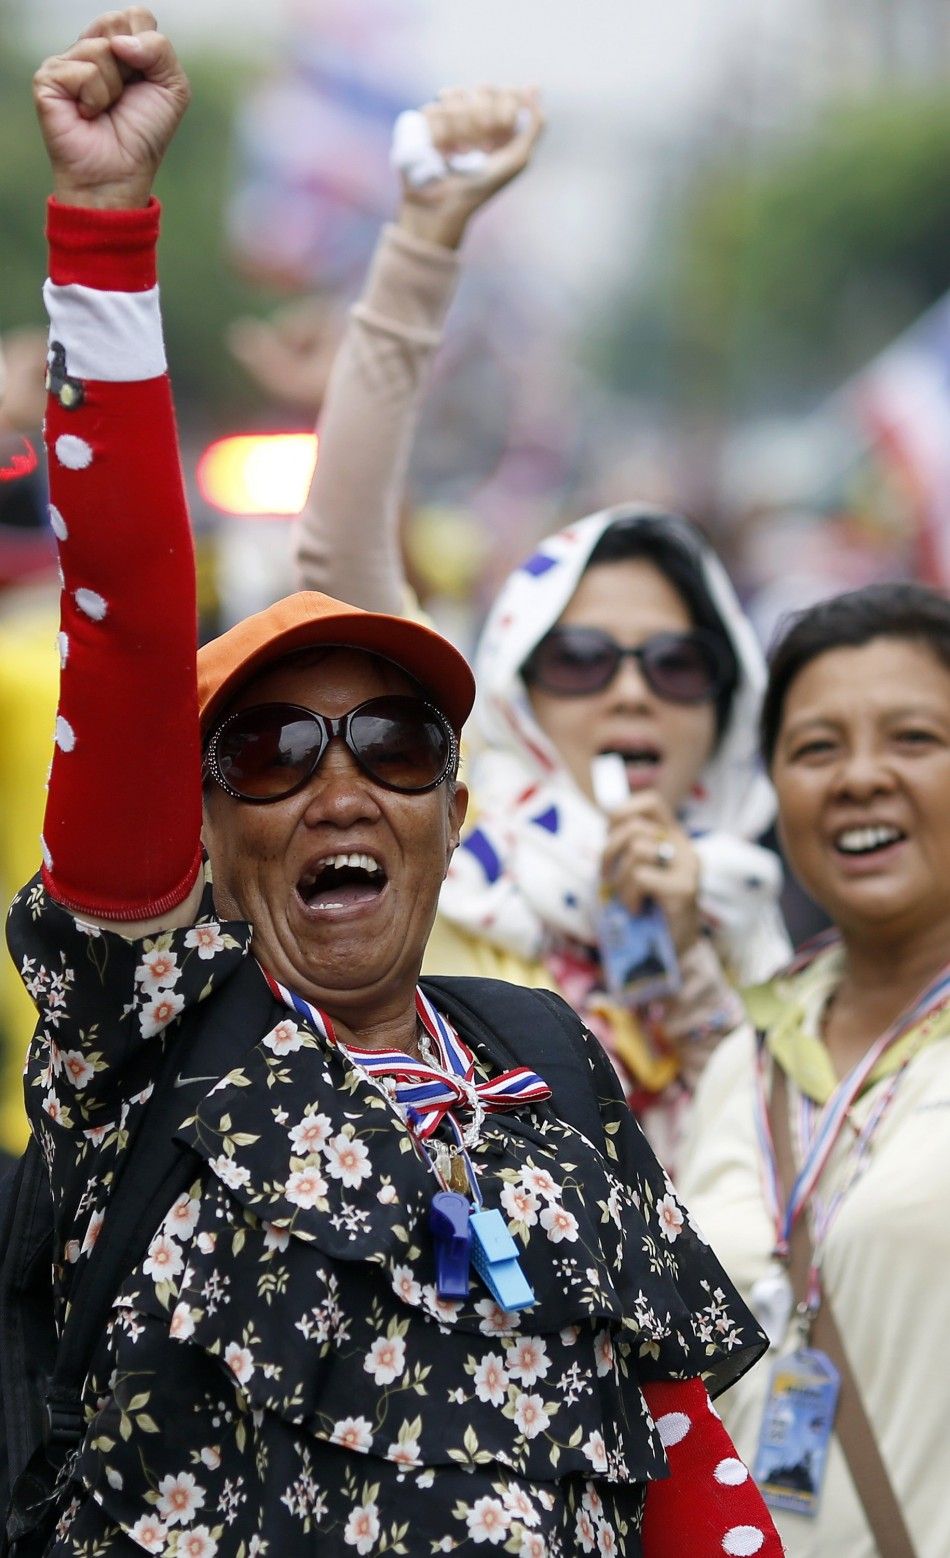 Anti-government protesters marching in the city centre celebrate shortly after a Thai court delivered its verdict on Prime Minister Yingluck Shinawatra, in Bangkok May 7, 2014. The Thai court found Yingluck guilty on Wednesday of violating the constitutio